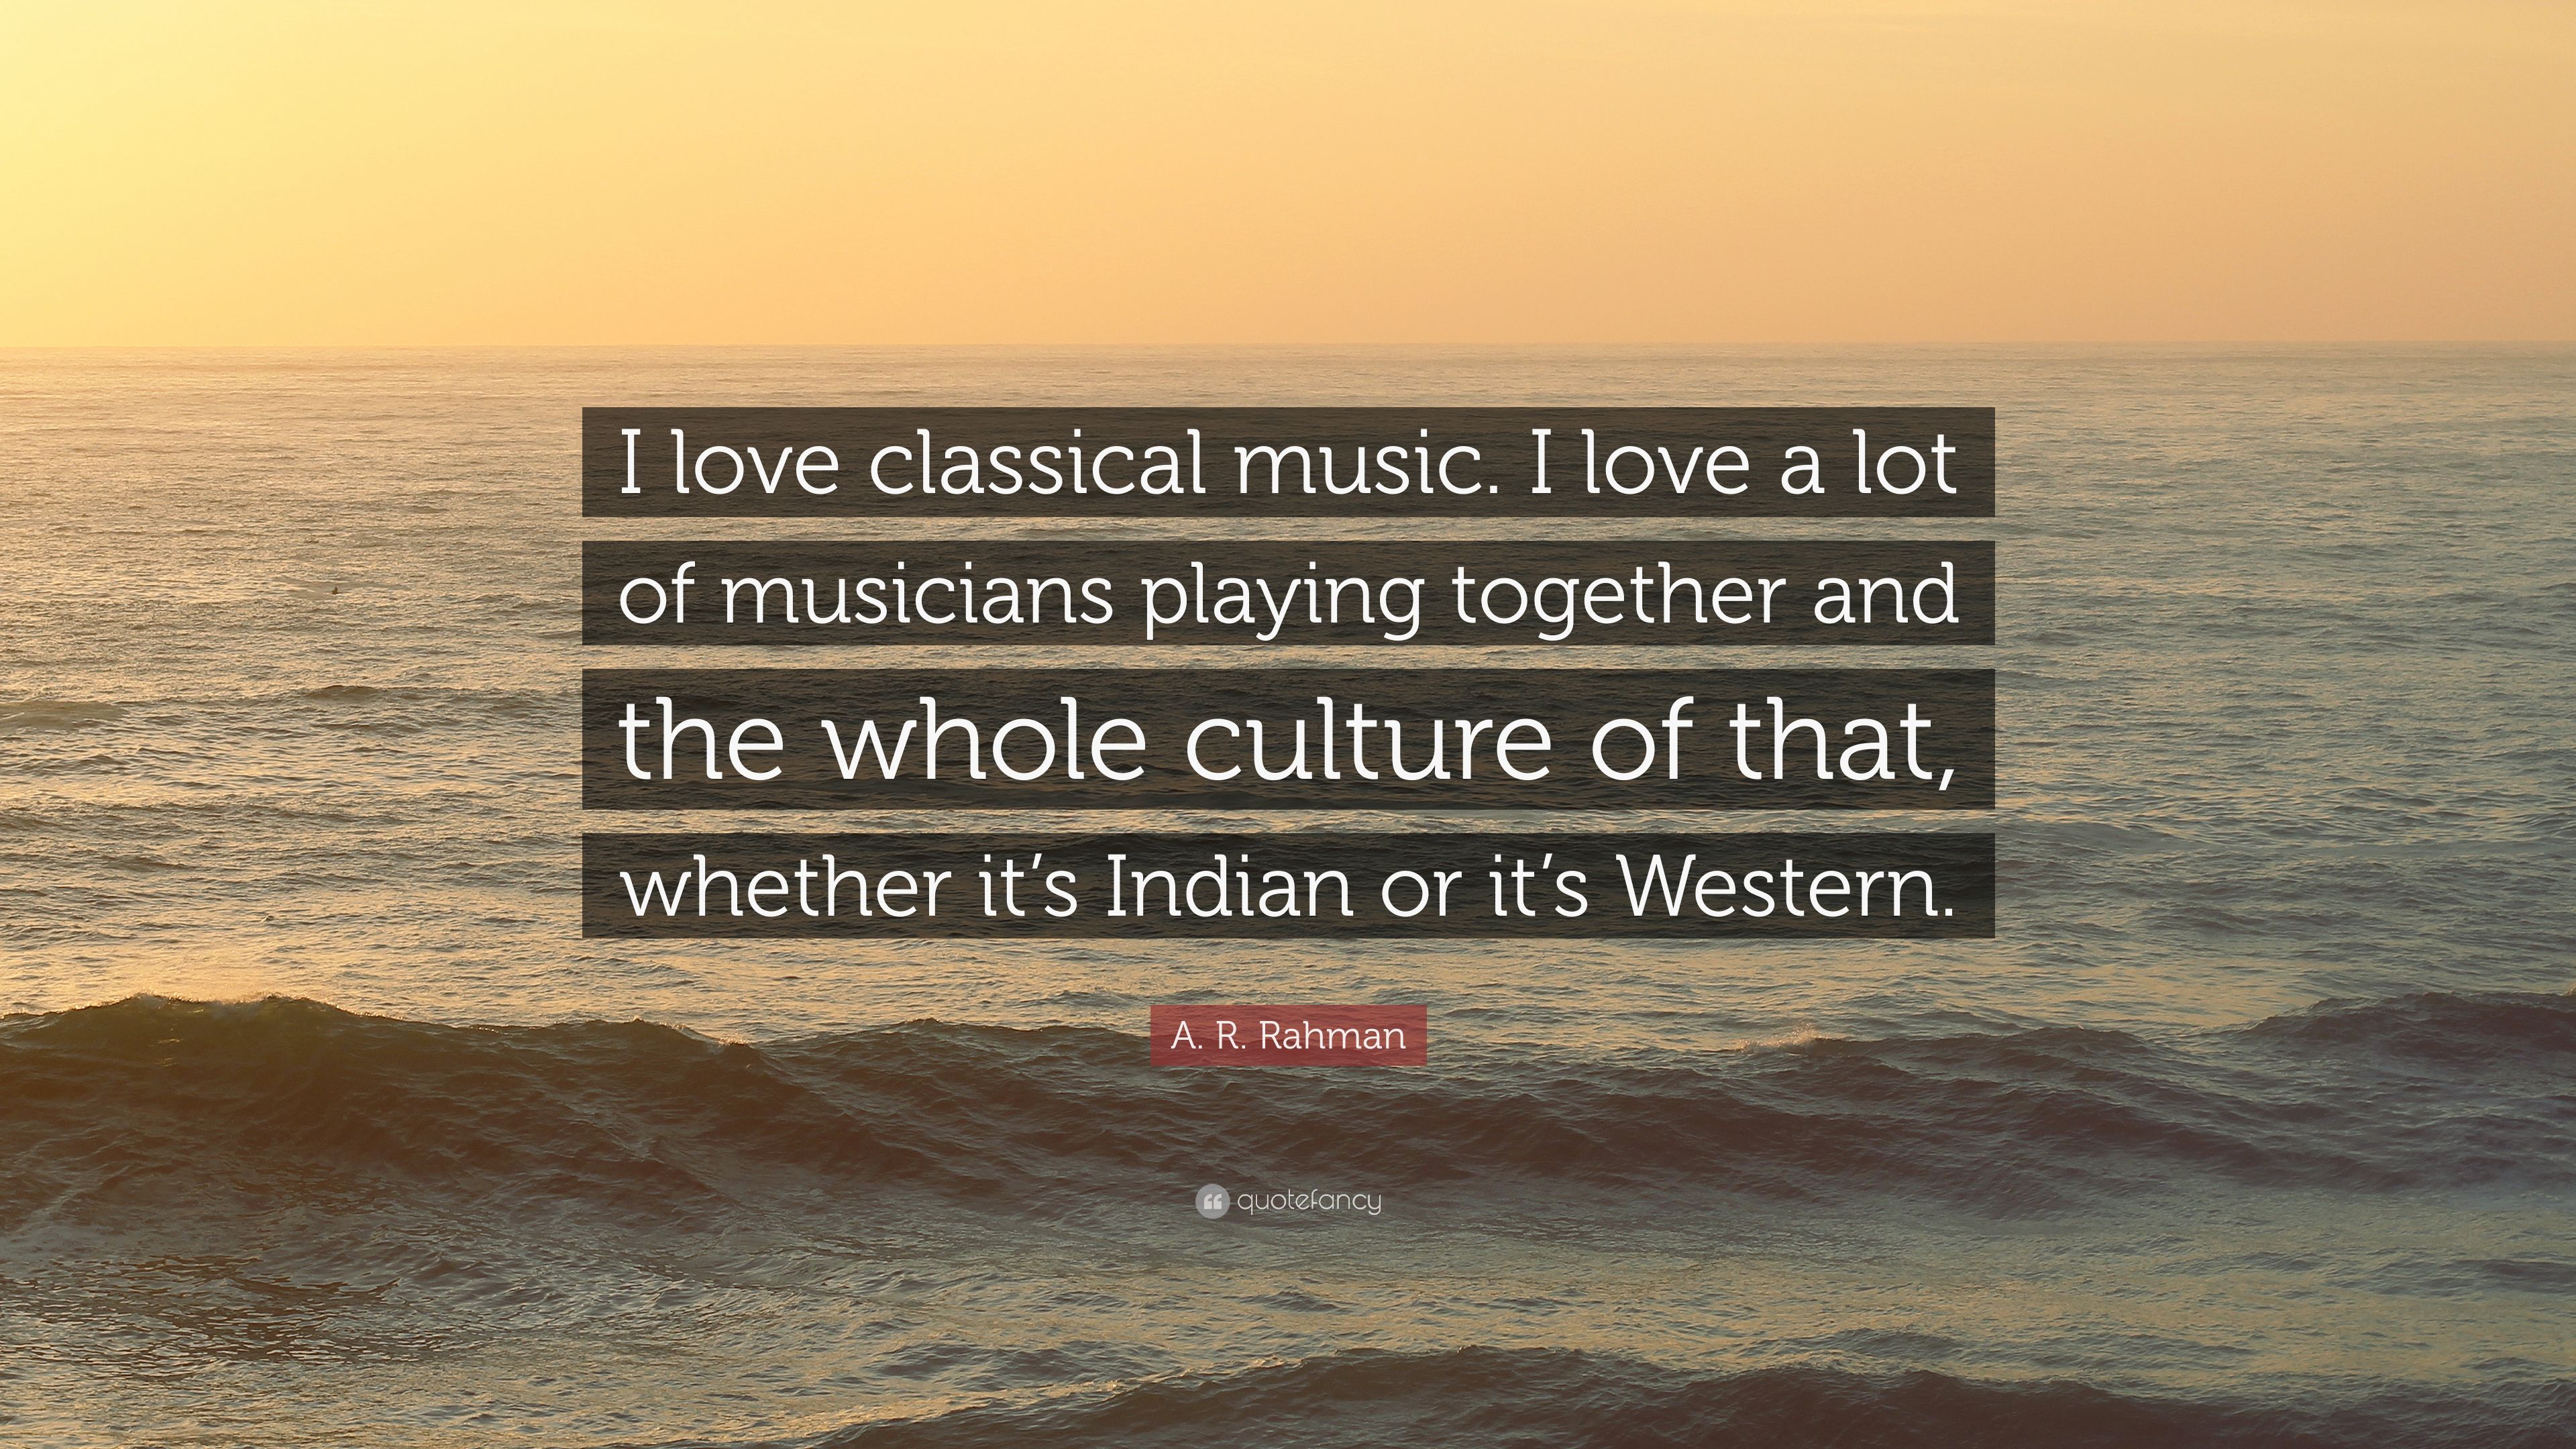 A. R. Rahman Quote: “I love classical music. I love a lot of musicians playing together and the whole culture of that, whether it's Indian or.” (10 wallpaper)